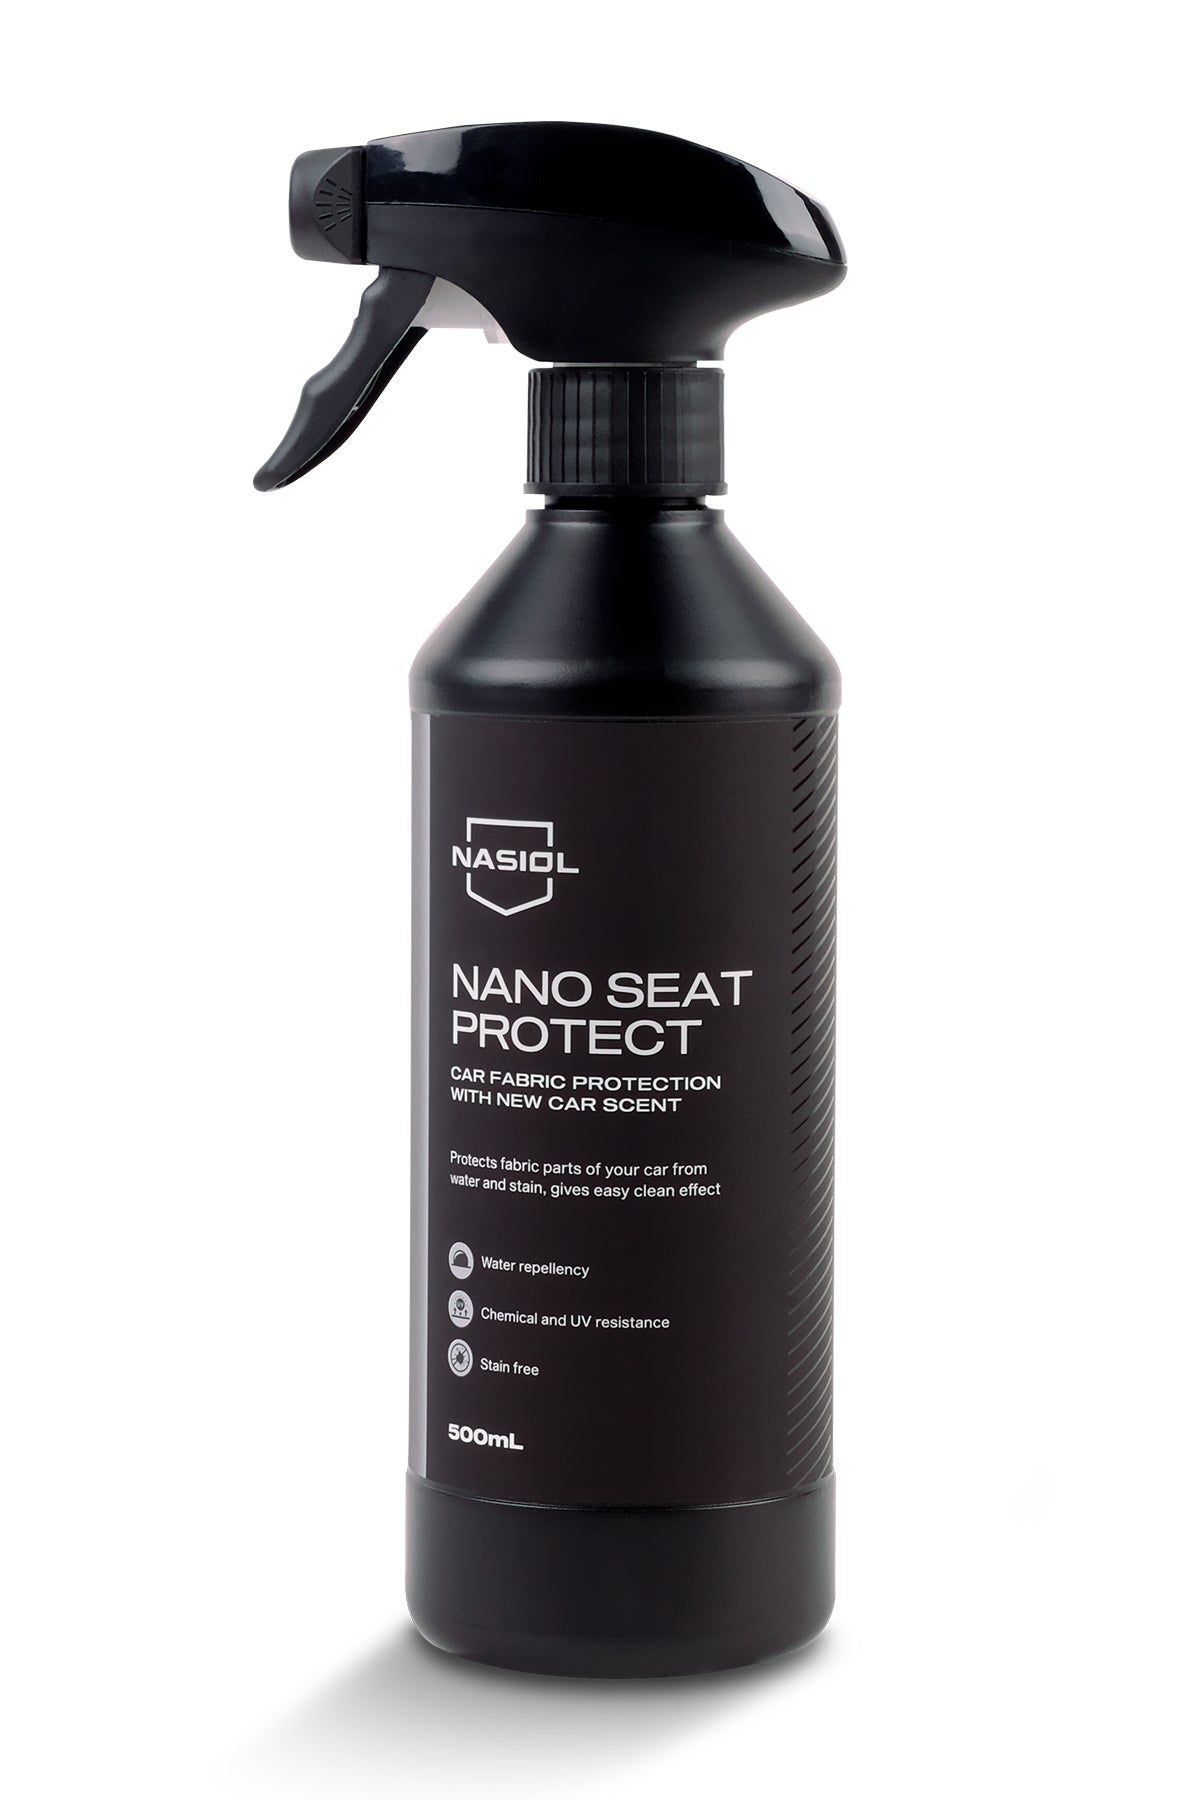 Nasiol Nano Seat Protect Car Fabric Protector with New Car Scent 500mL –  The Ceramic Coating Guys